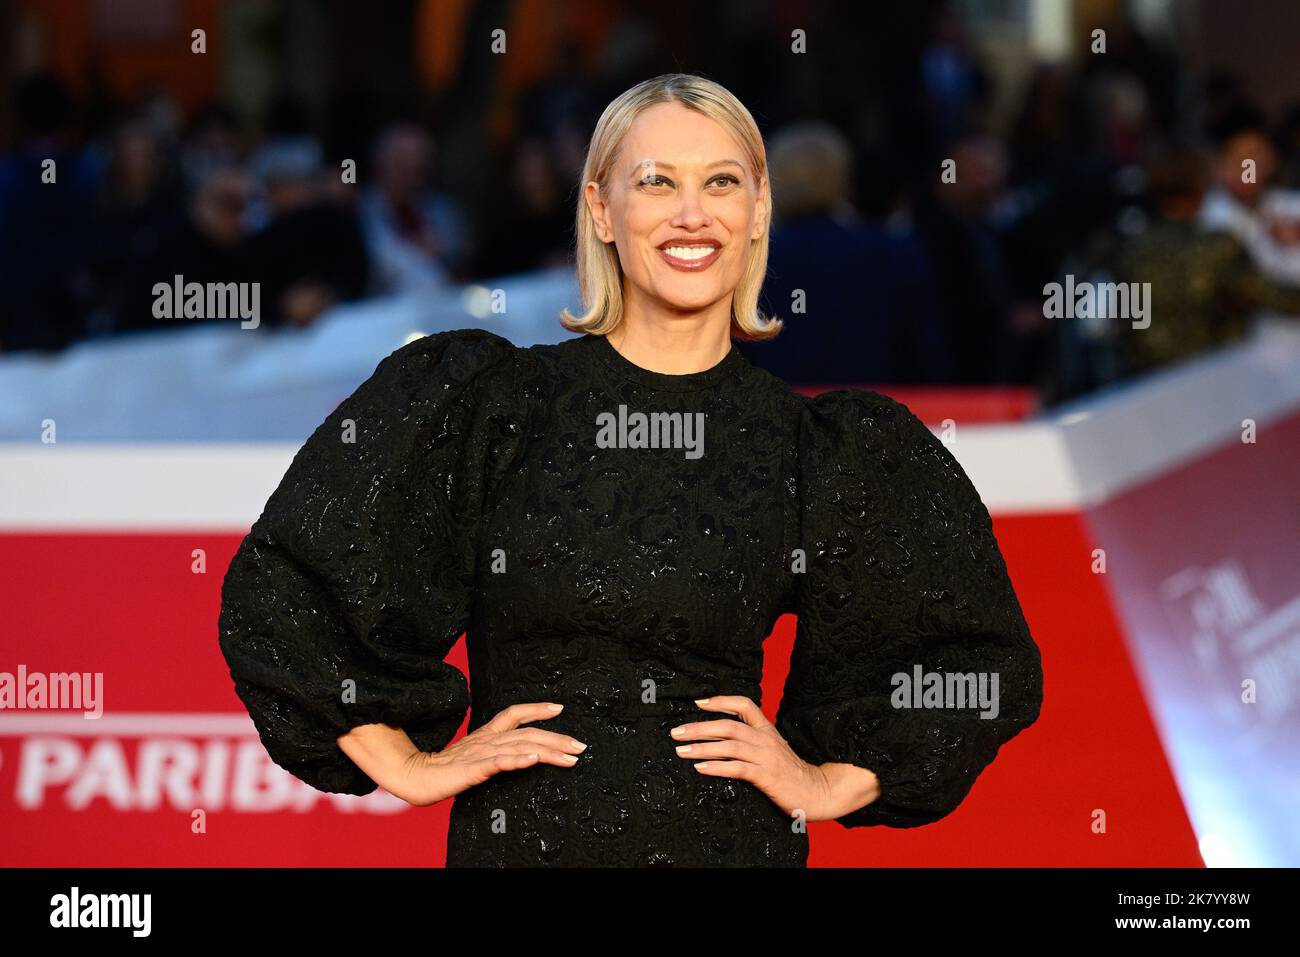 Roma, Italy. 18th Oct, 2022. ROME, ITALY - OCTOBER 18: Lea Mornar attends the photocall for 'La California' during the 17th Rome Film Festival at Auditorium Parco Della Musica on October 18, 2022 in Rome, Italy. Credit: Independent Photo Agency/Alamy Live News Stock Photo